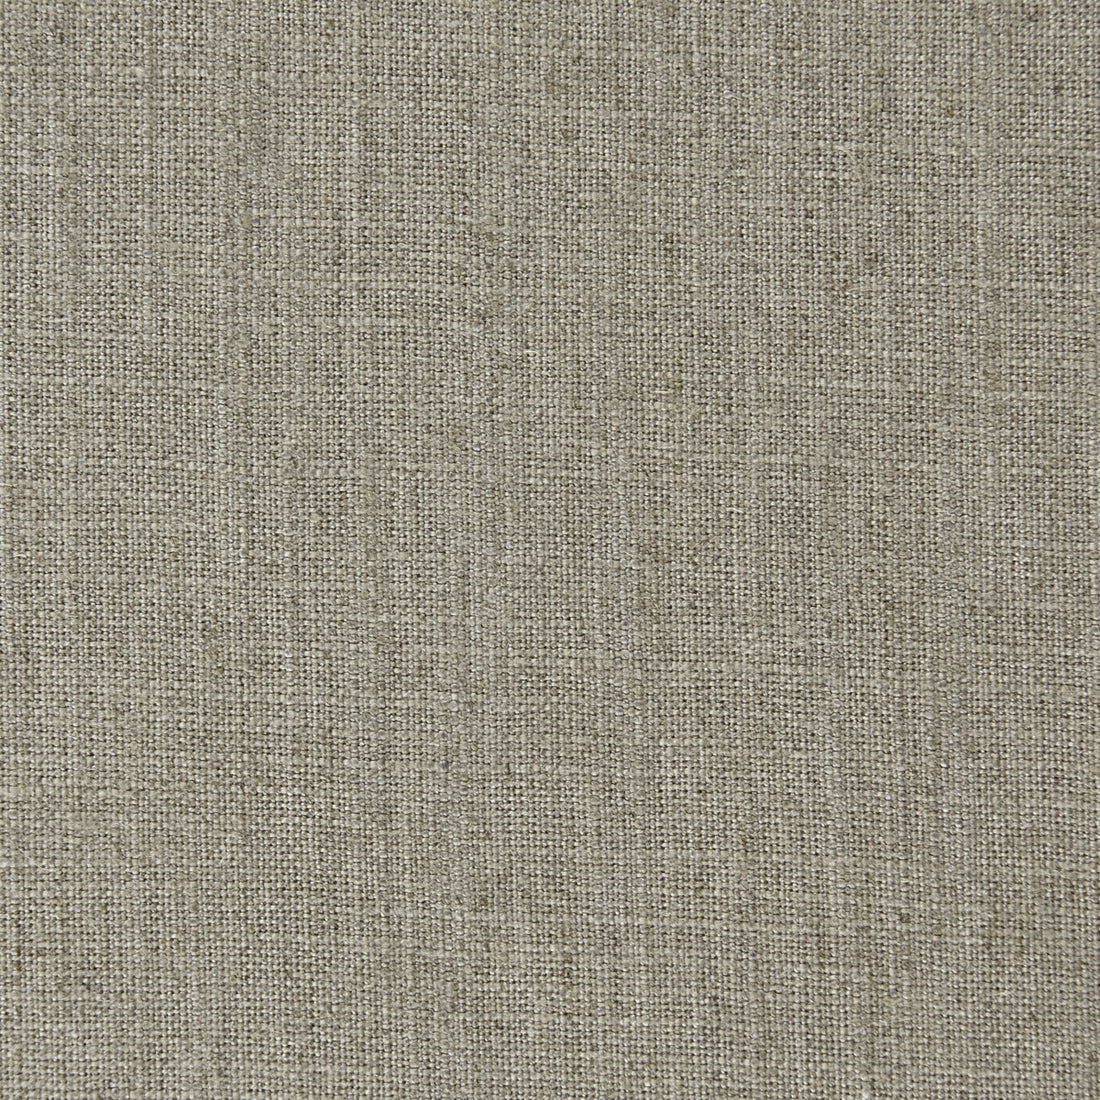 Biarritz fabric in truffle color - pattern F0965/46.CAC.0 - by Clarke And Clarke in the Clarke &amp; Clarke Biarritz collection